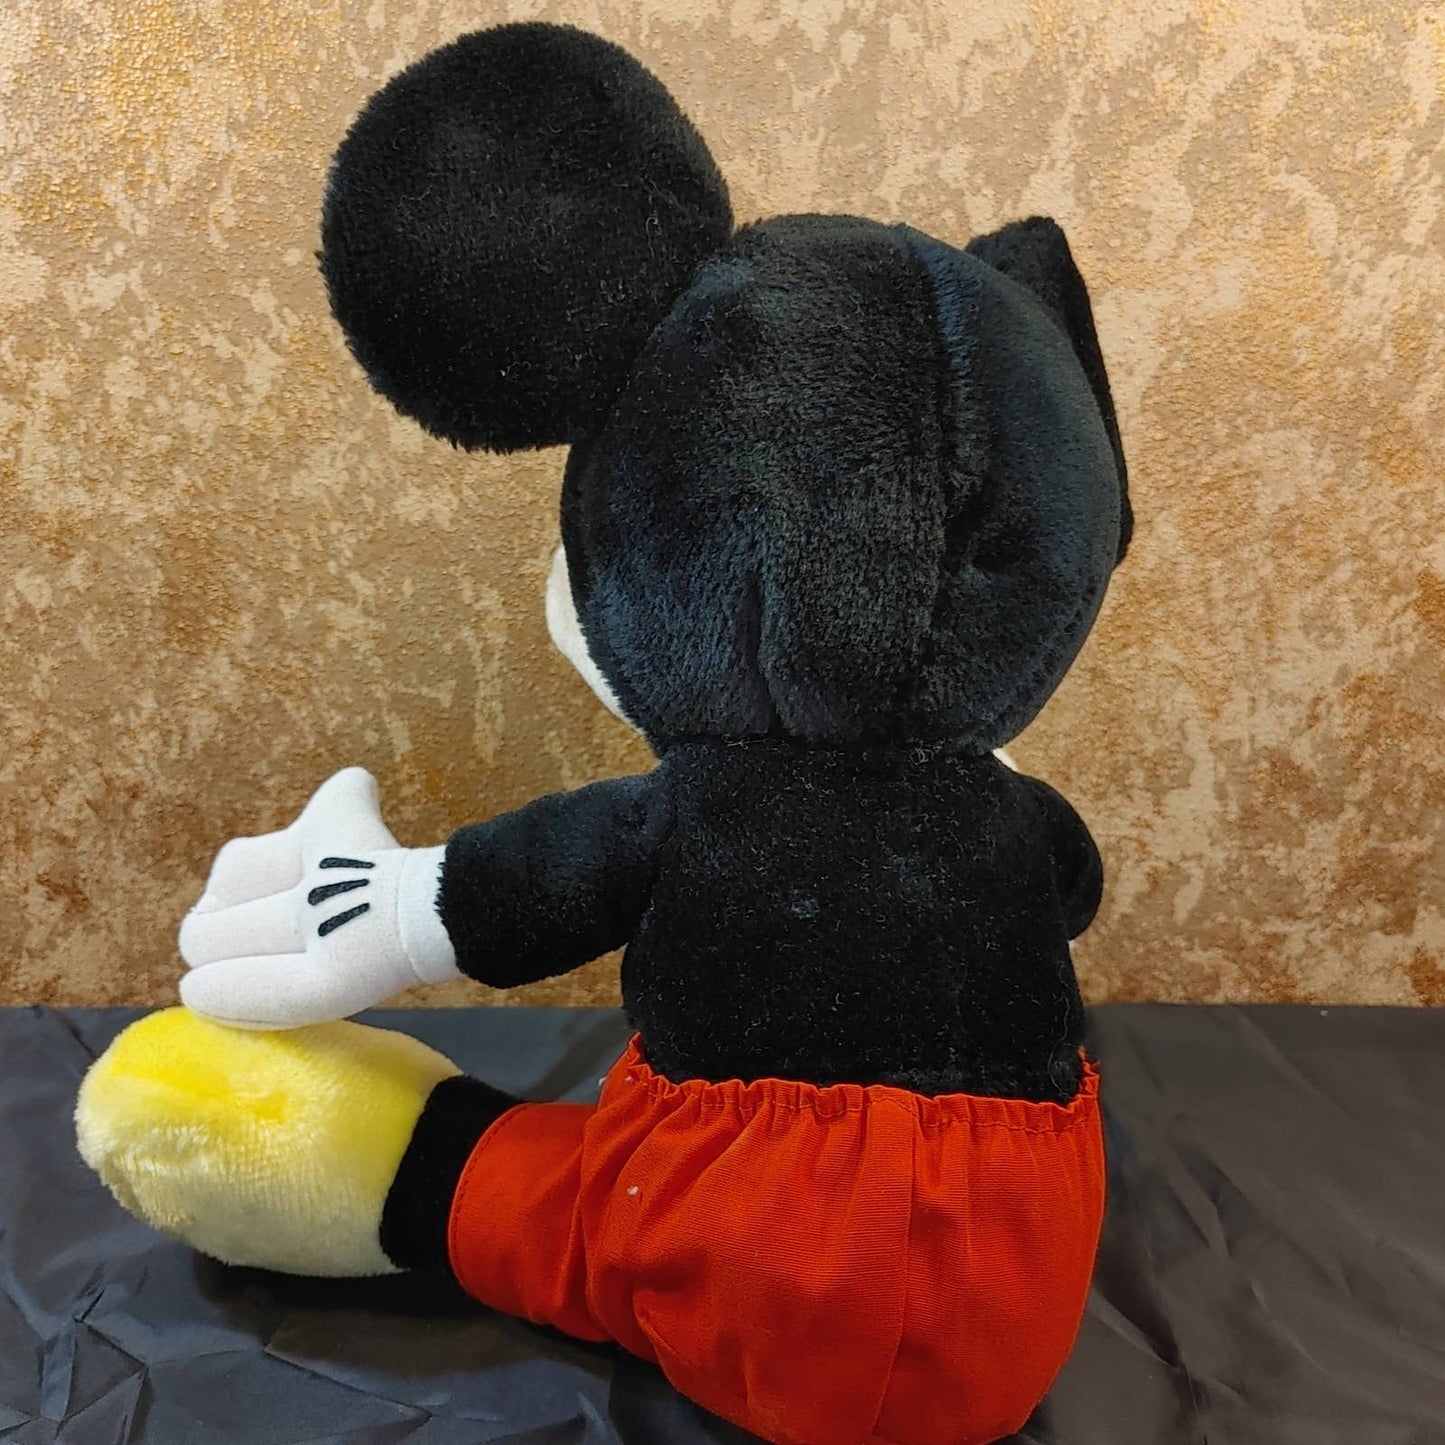 Vinty Mickey! Vintage 1980's Mouse Plush Disney 12" Excellent Free Shipping!